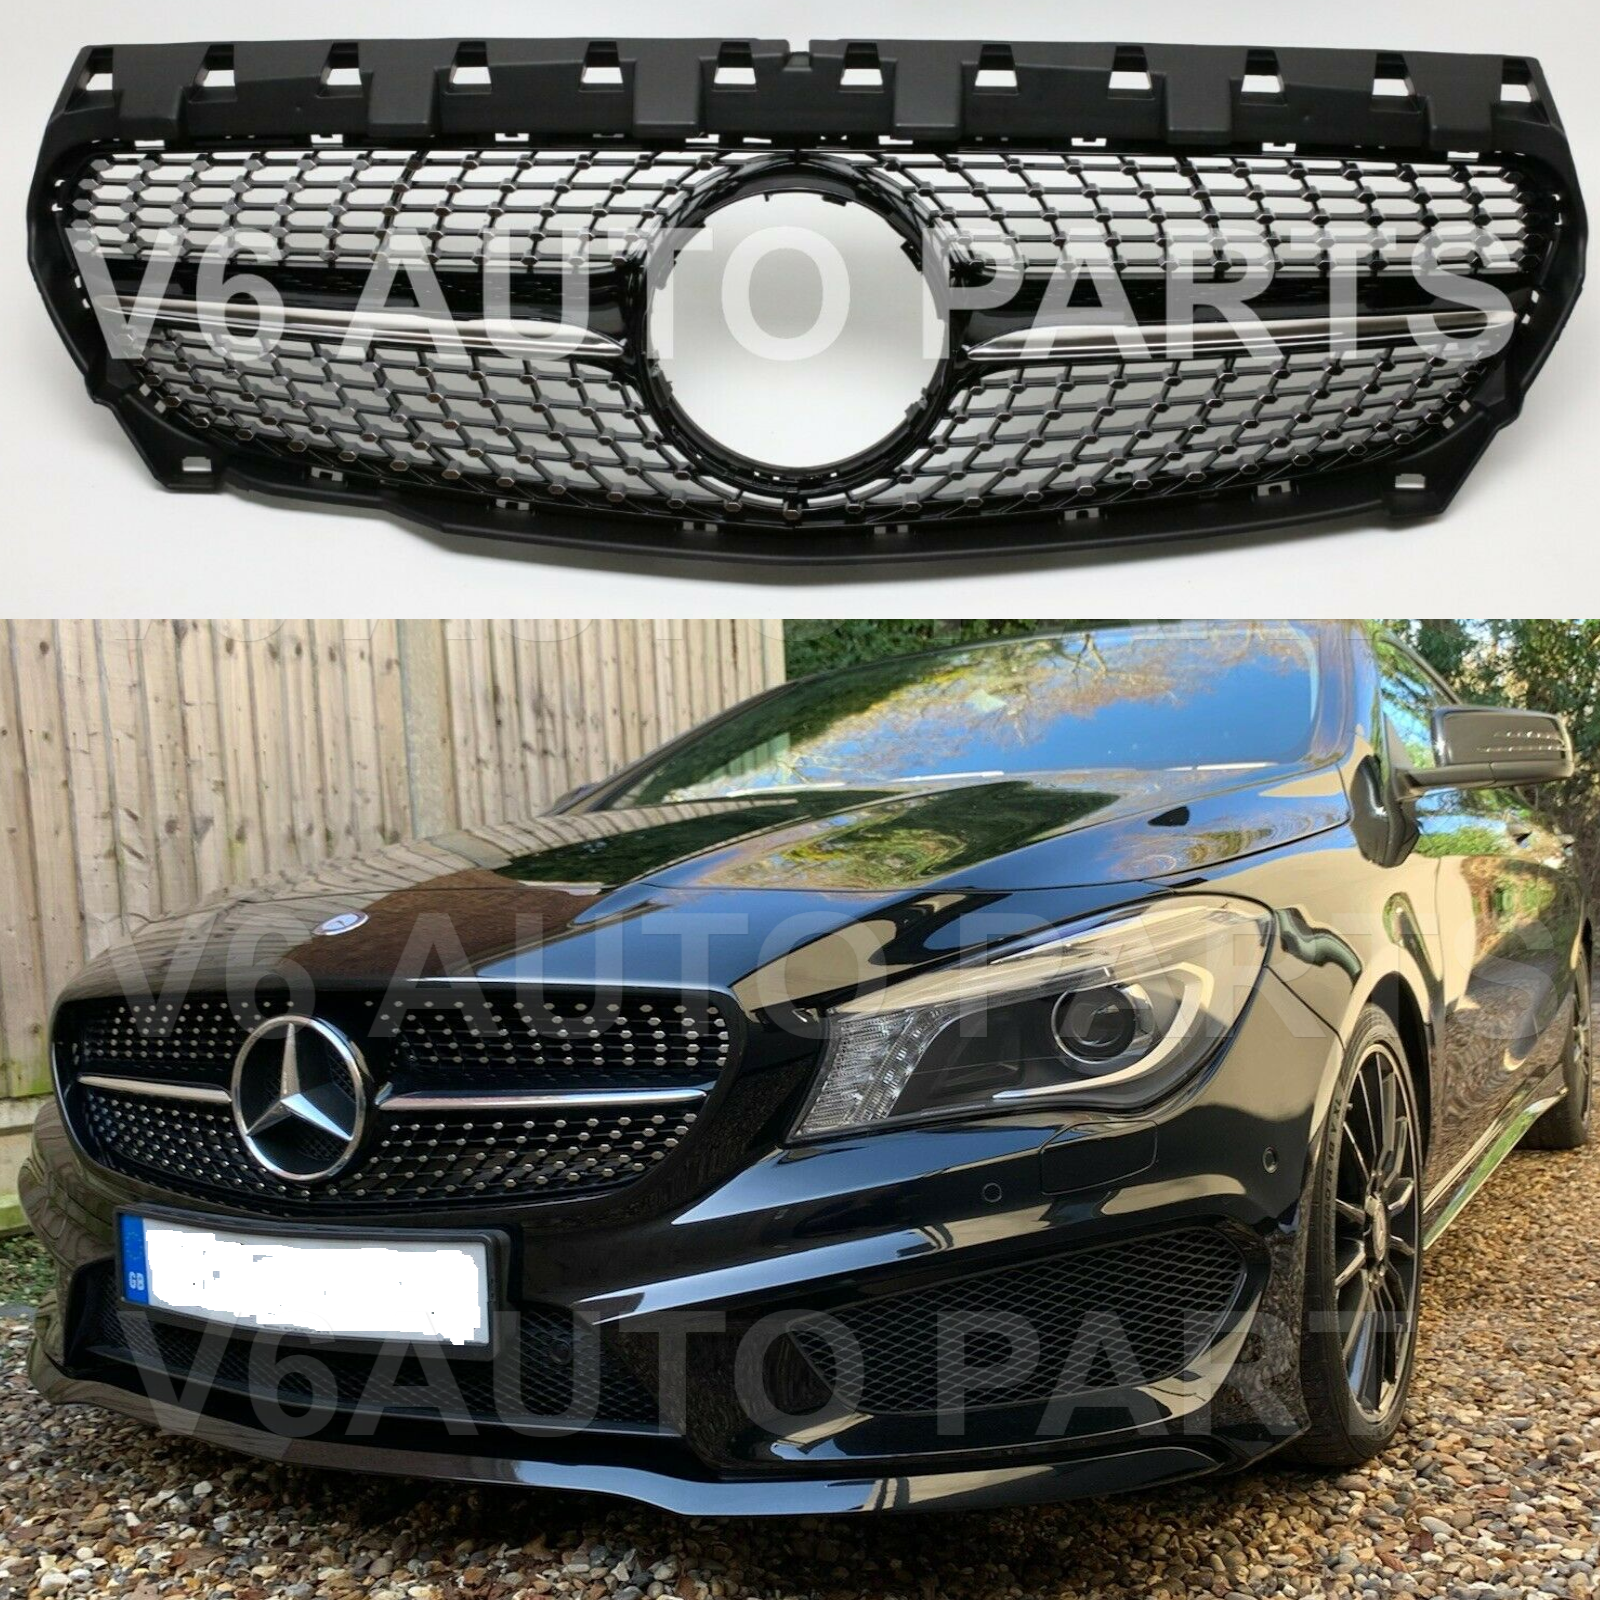 For Mercedes CLA-Class C117 W117 180d Front Radiator Black Grille 2013-2017 AMG